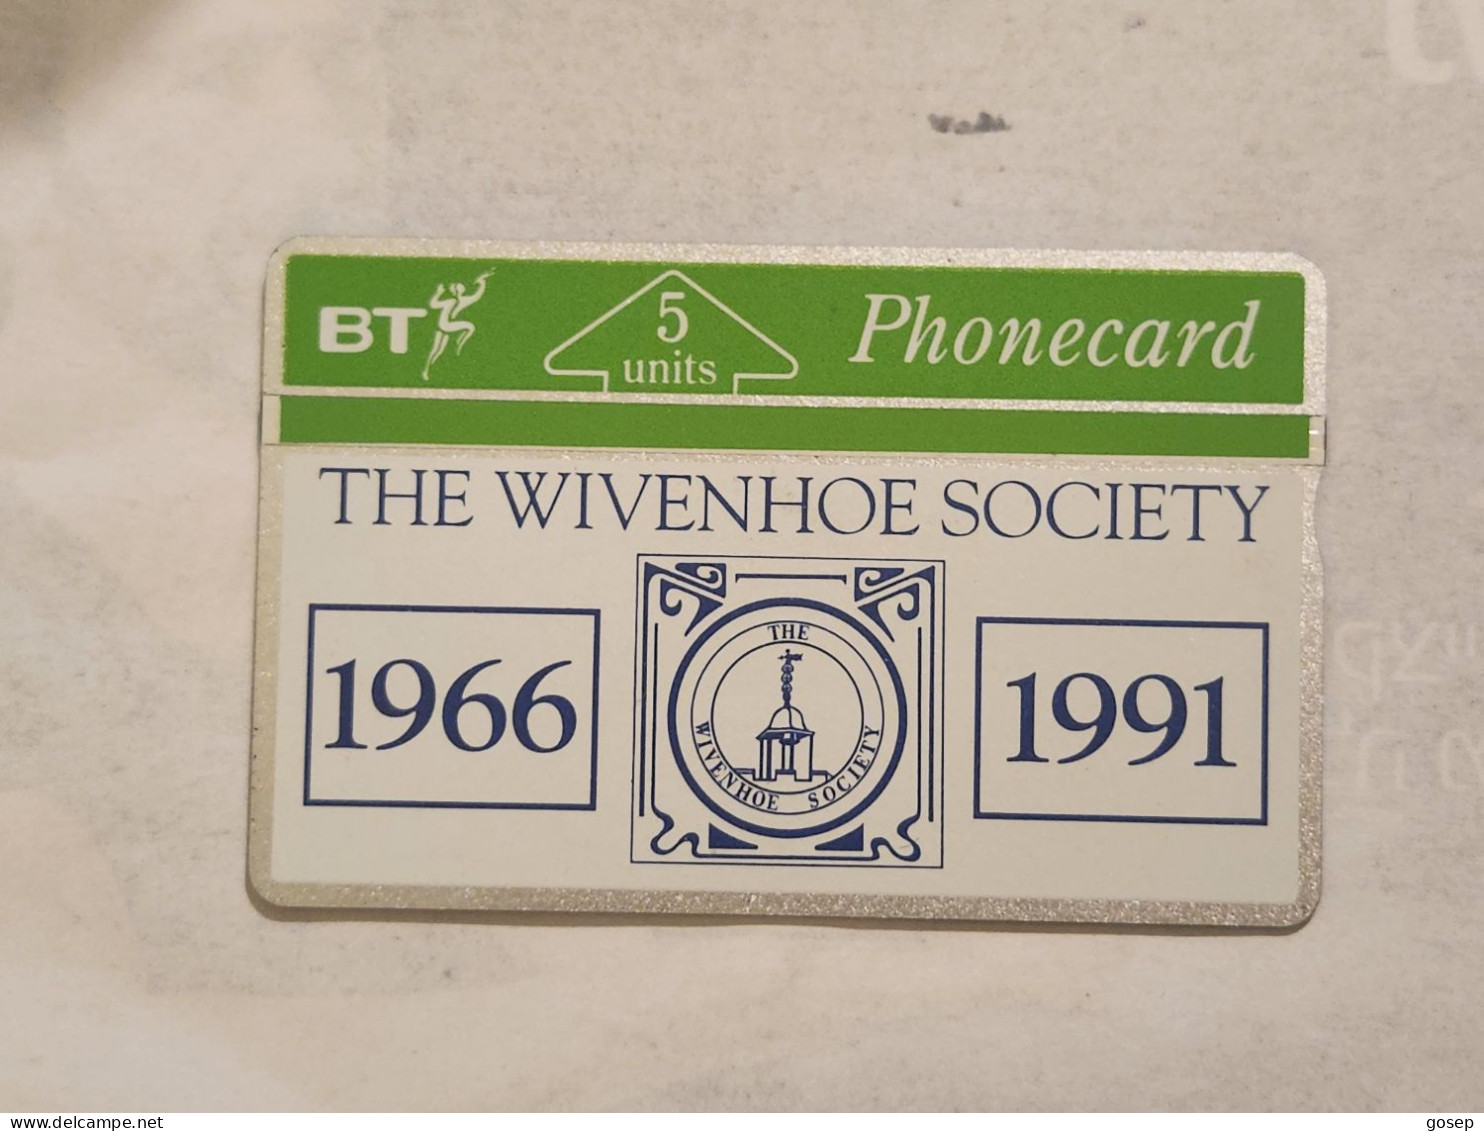 United Kingdom-(BTG-014)-THE WIVENHOE SOCIETY-(18)(5units)(132H10286)(tirage-500)(price Cataloge-7.00£-mint) - BT General Issues